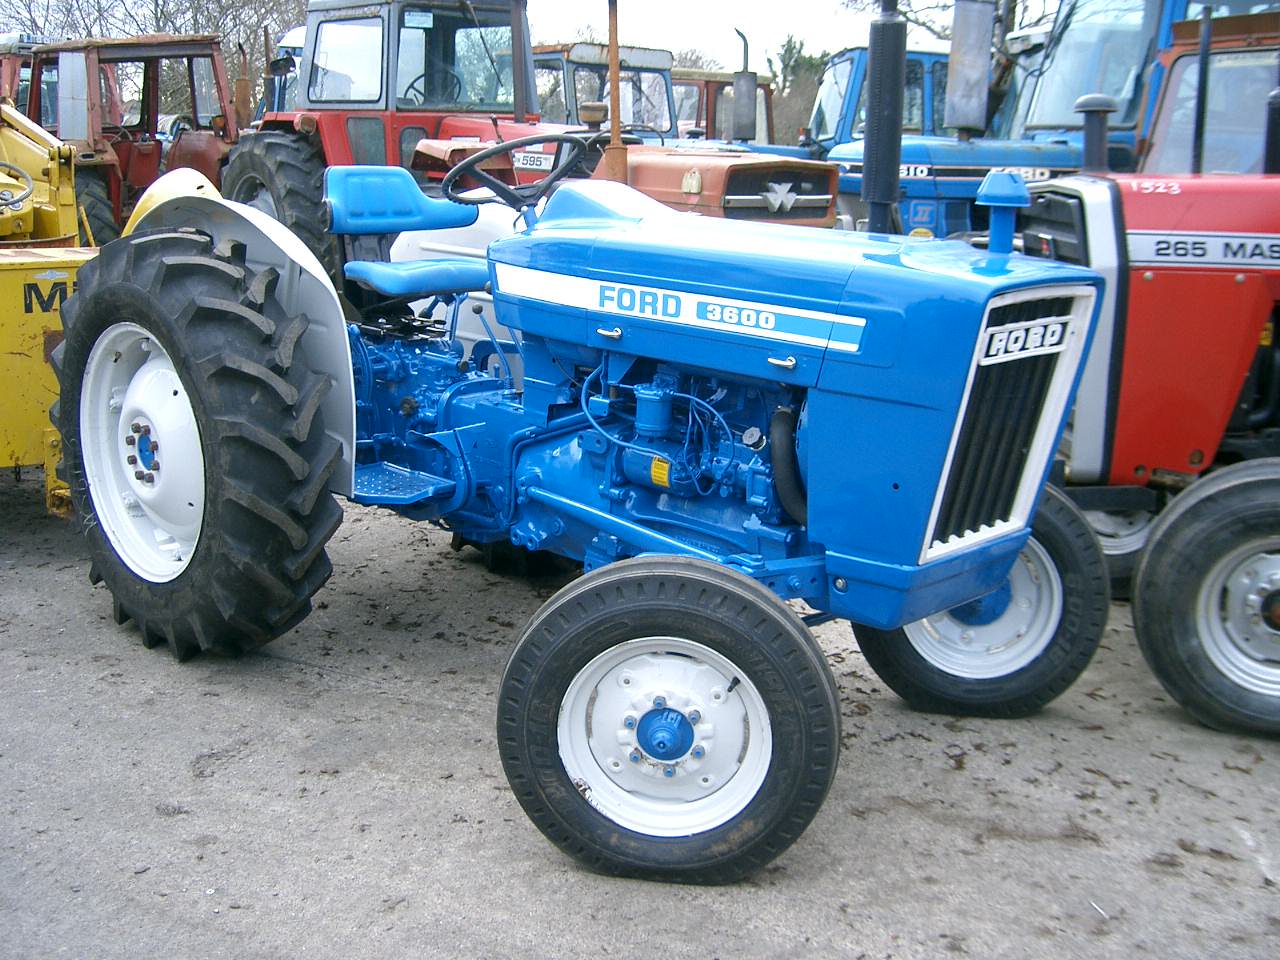 Ford 3600 Tractor Images & Pictures - Becuo